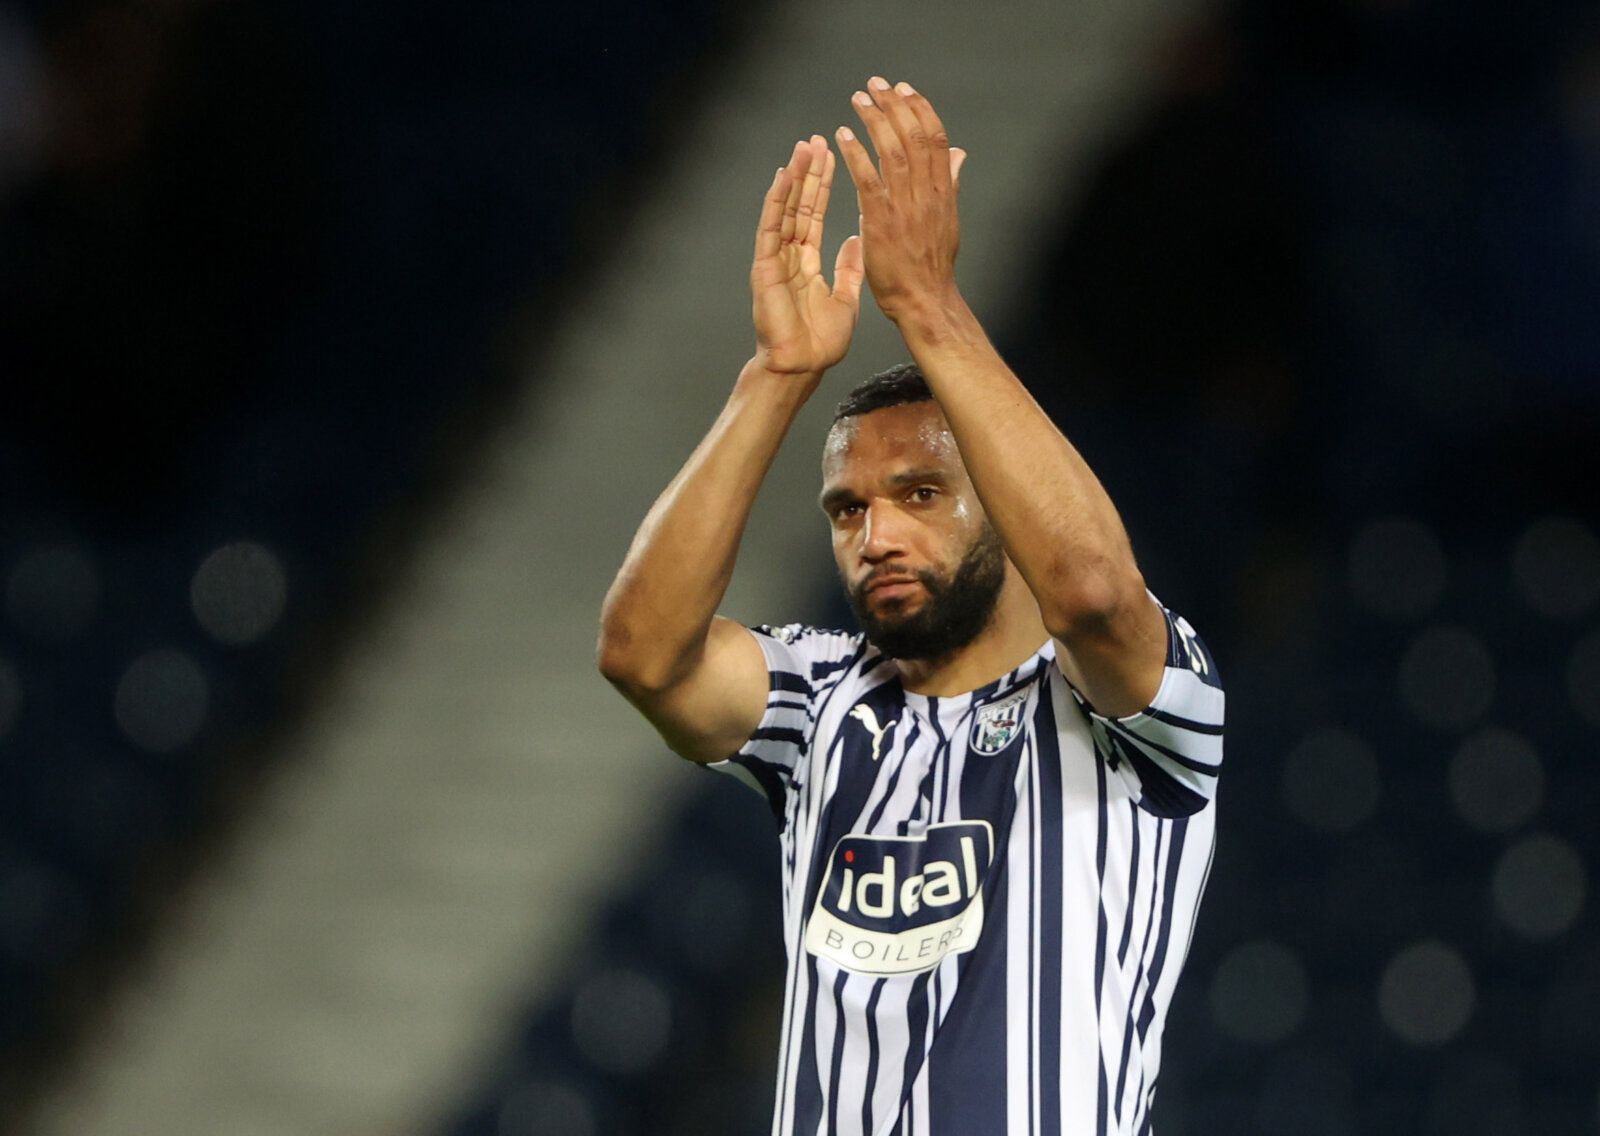 Soccer Football - Premier League - West Bromwich Albion v West Ham United - The Hawthorns, West Bromwich, Britain - May 19, 2021 West Bromwich Albion's Matt Phillips applauds fans during a lap of appreciation after the match, as a limited number of fans are permitted at outdoor sports venues Pool via REUTERS/Molly Darlington EDITORIAL USE ONLY. No use with unauthorized audio, video, data, fixture lists, club/league logos or 'live' services. Online in-match use limited to 75 images, no video emul